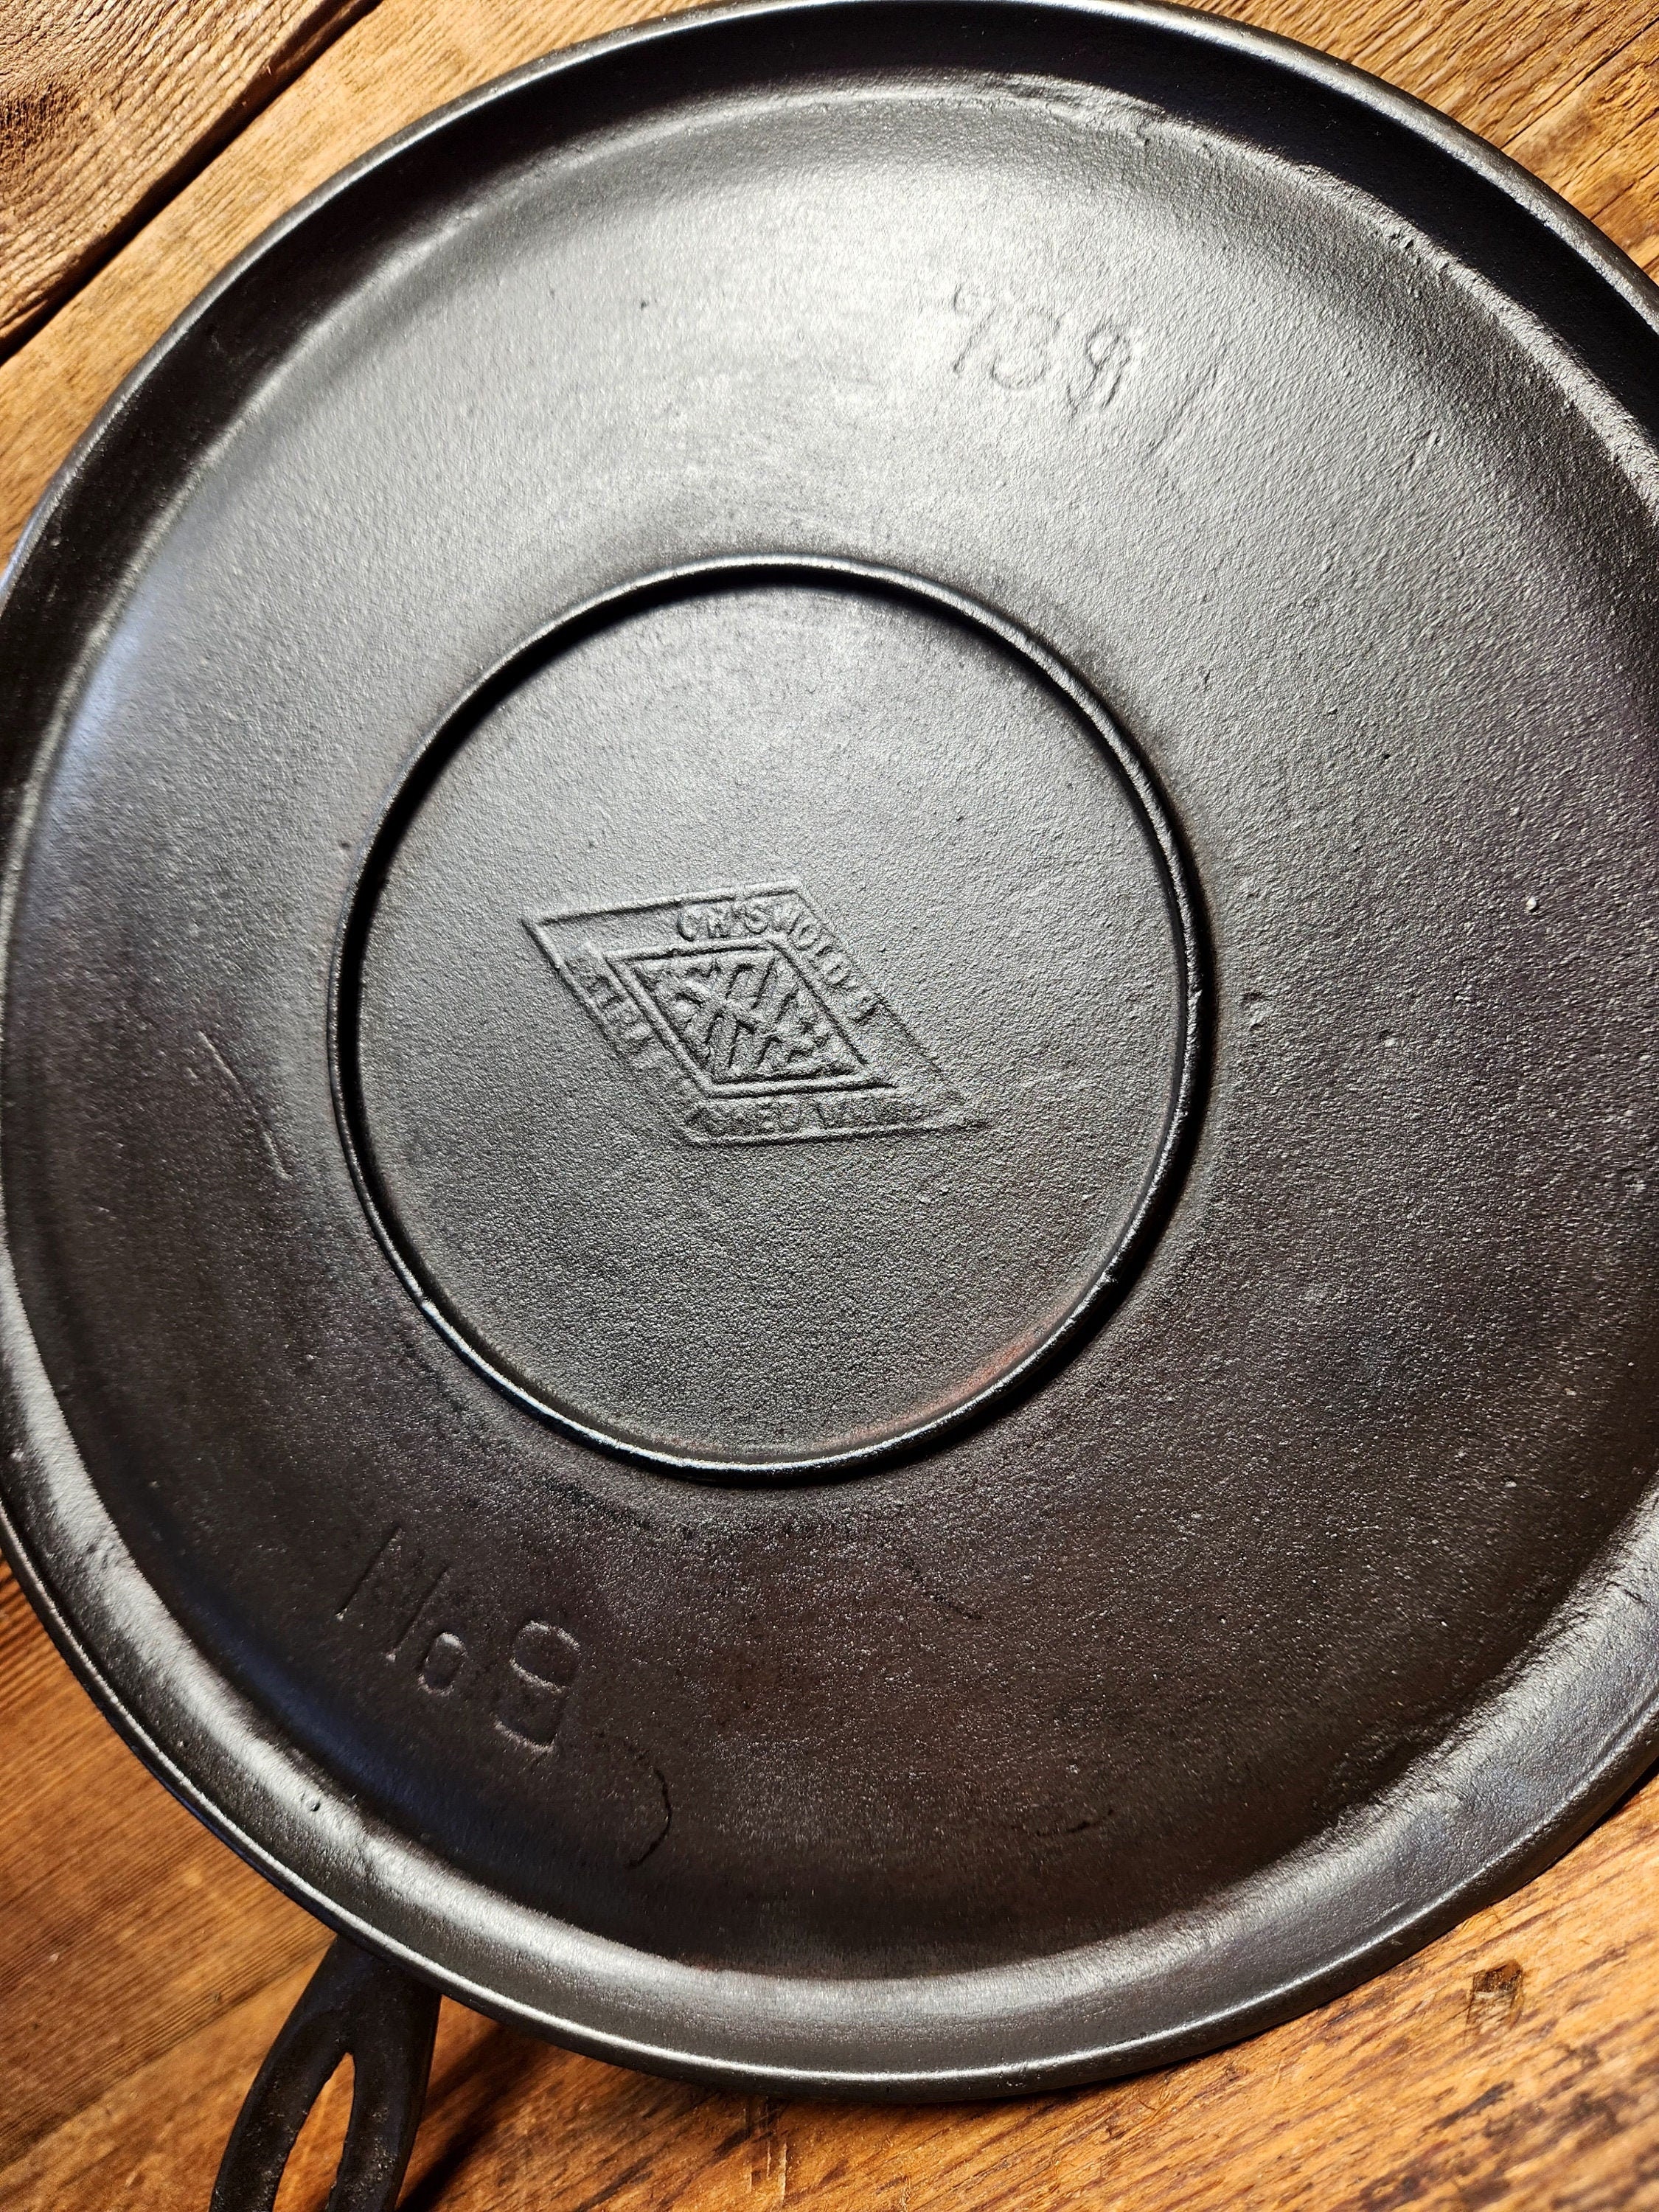 Antique CAST IRON MUFFIN PAN No. 18 6141 by GRISWOLD ERIE PA. 6